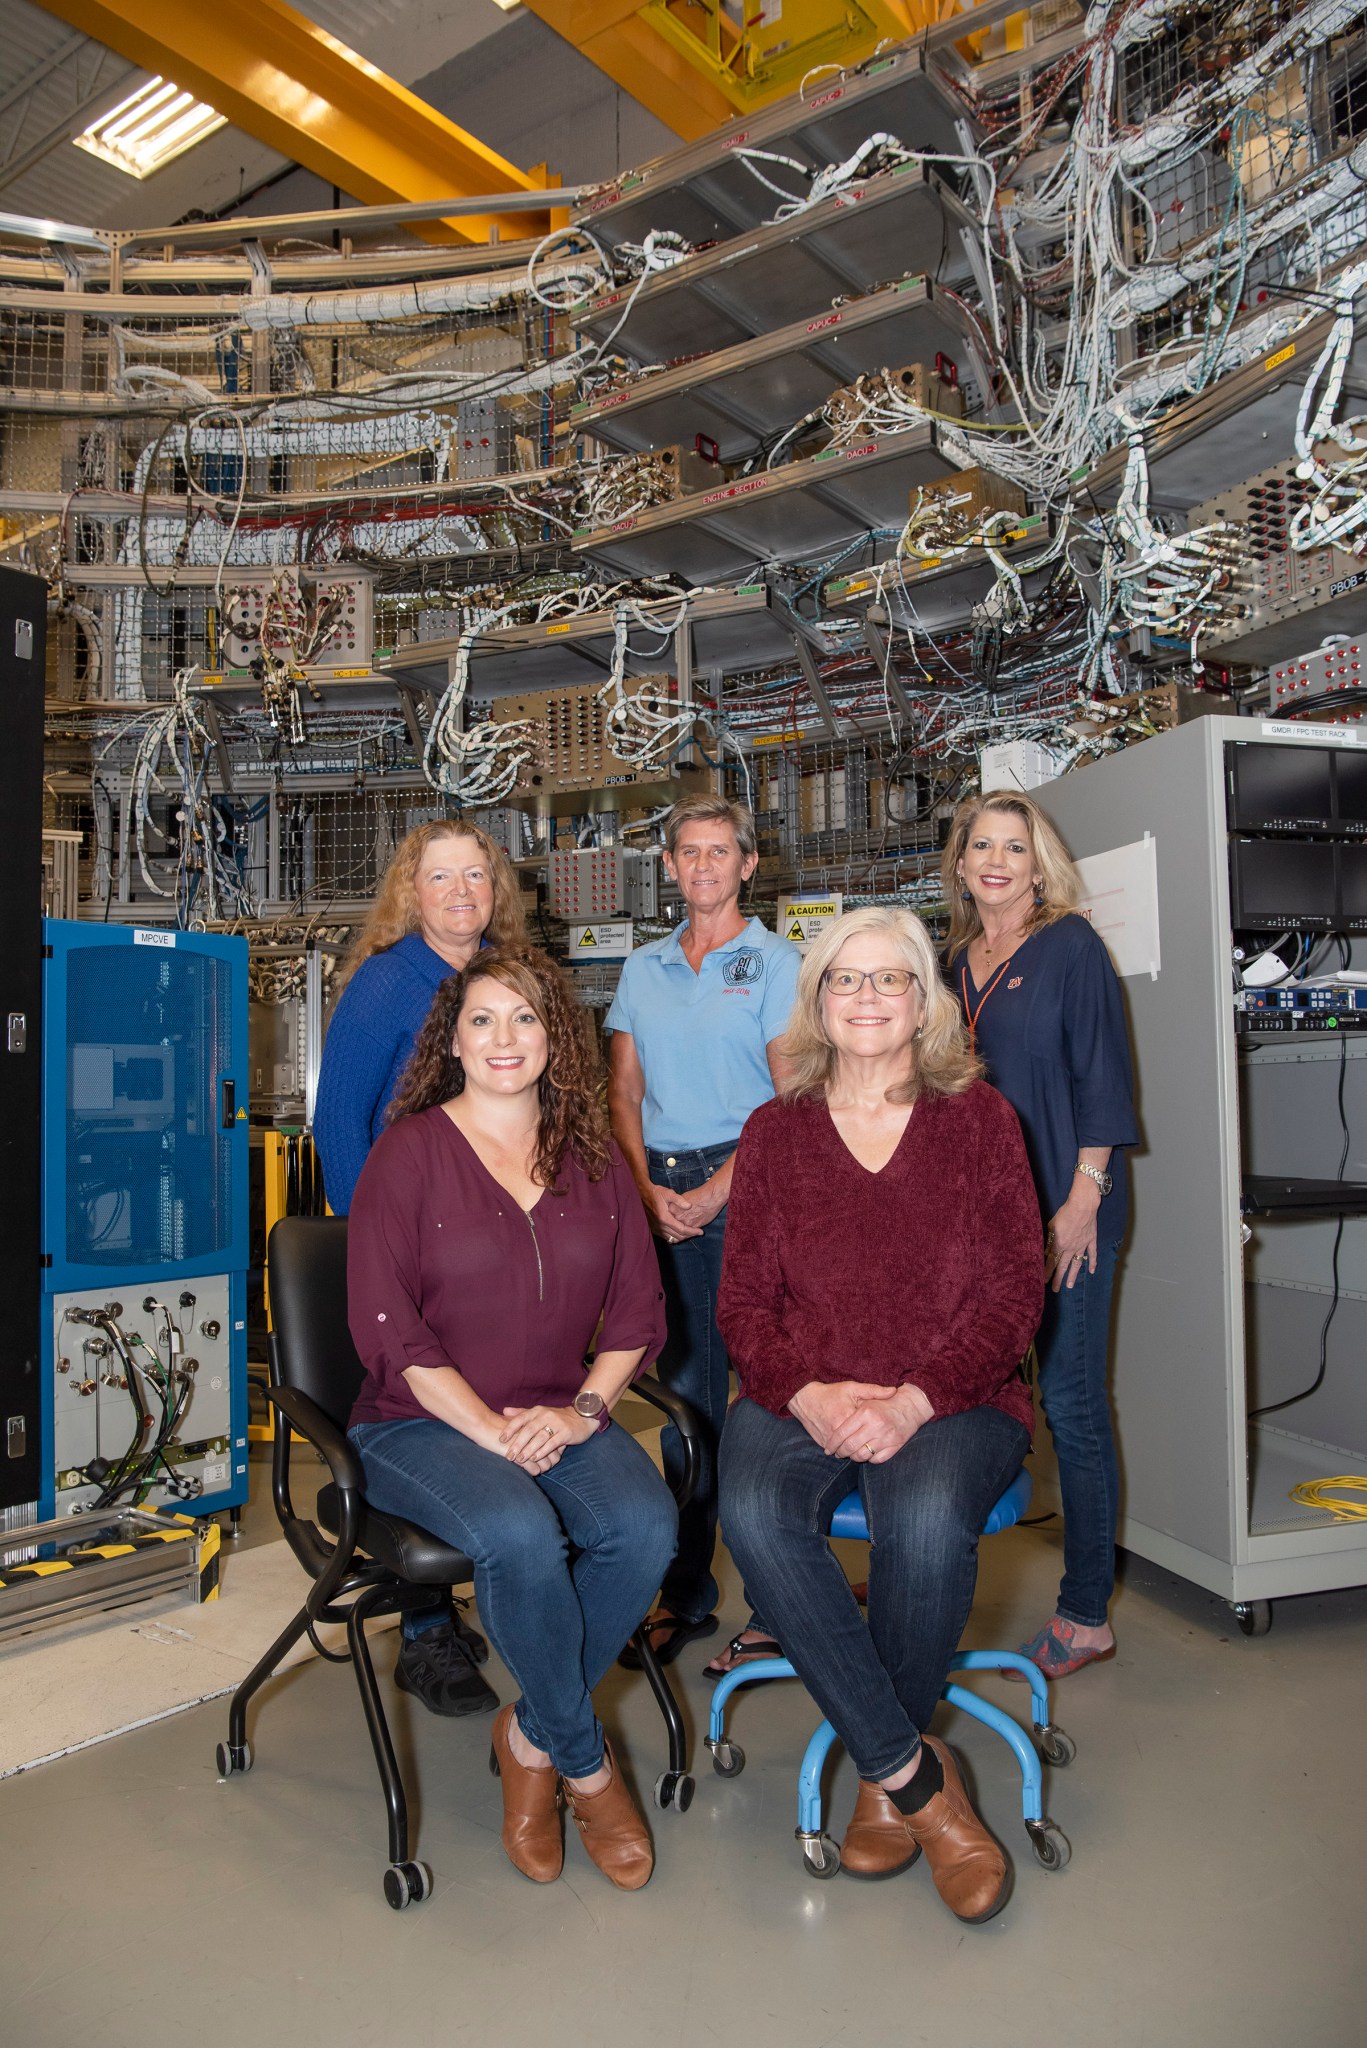 These women are engineering NASA’s return to the Moon with flight software that will control the rocket for Artemis missions.  